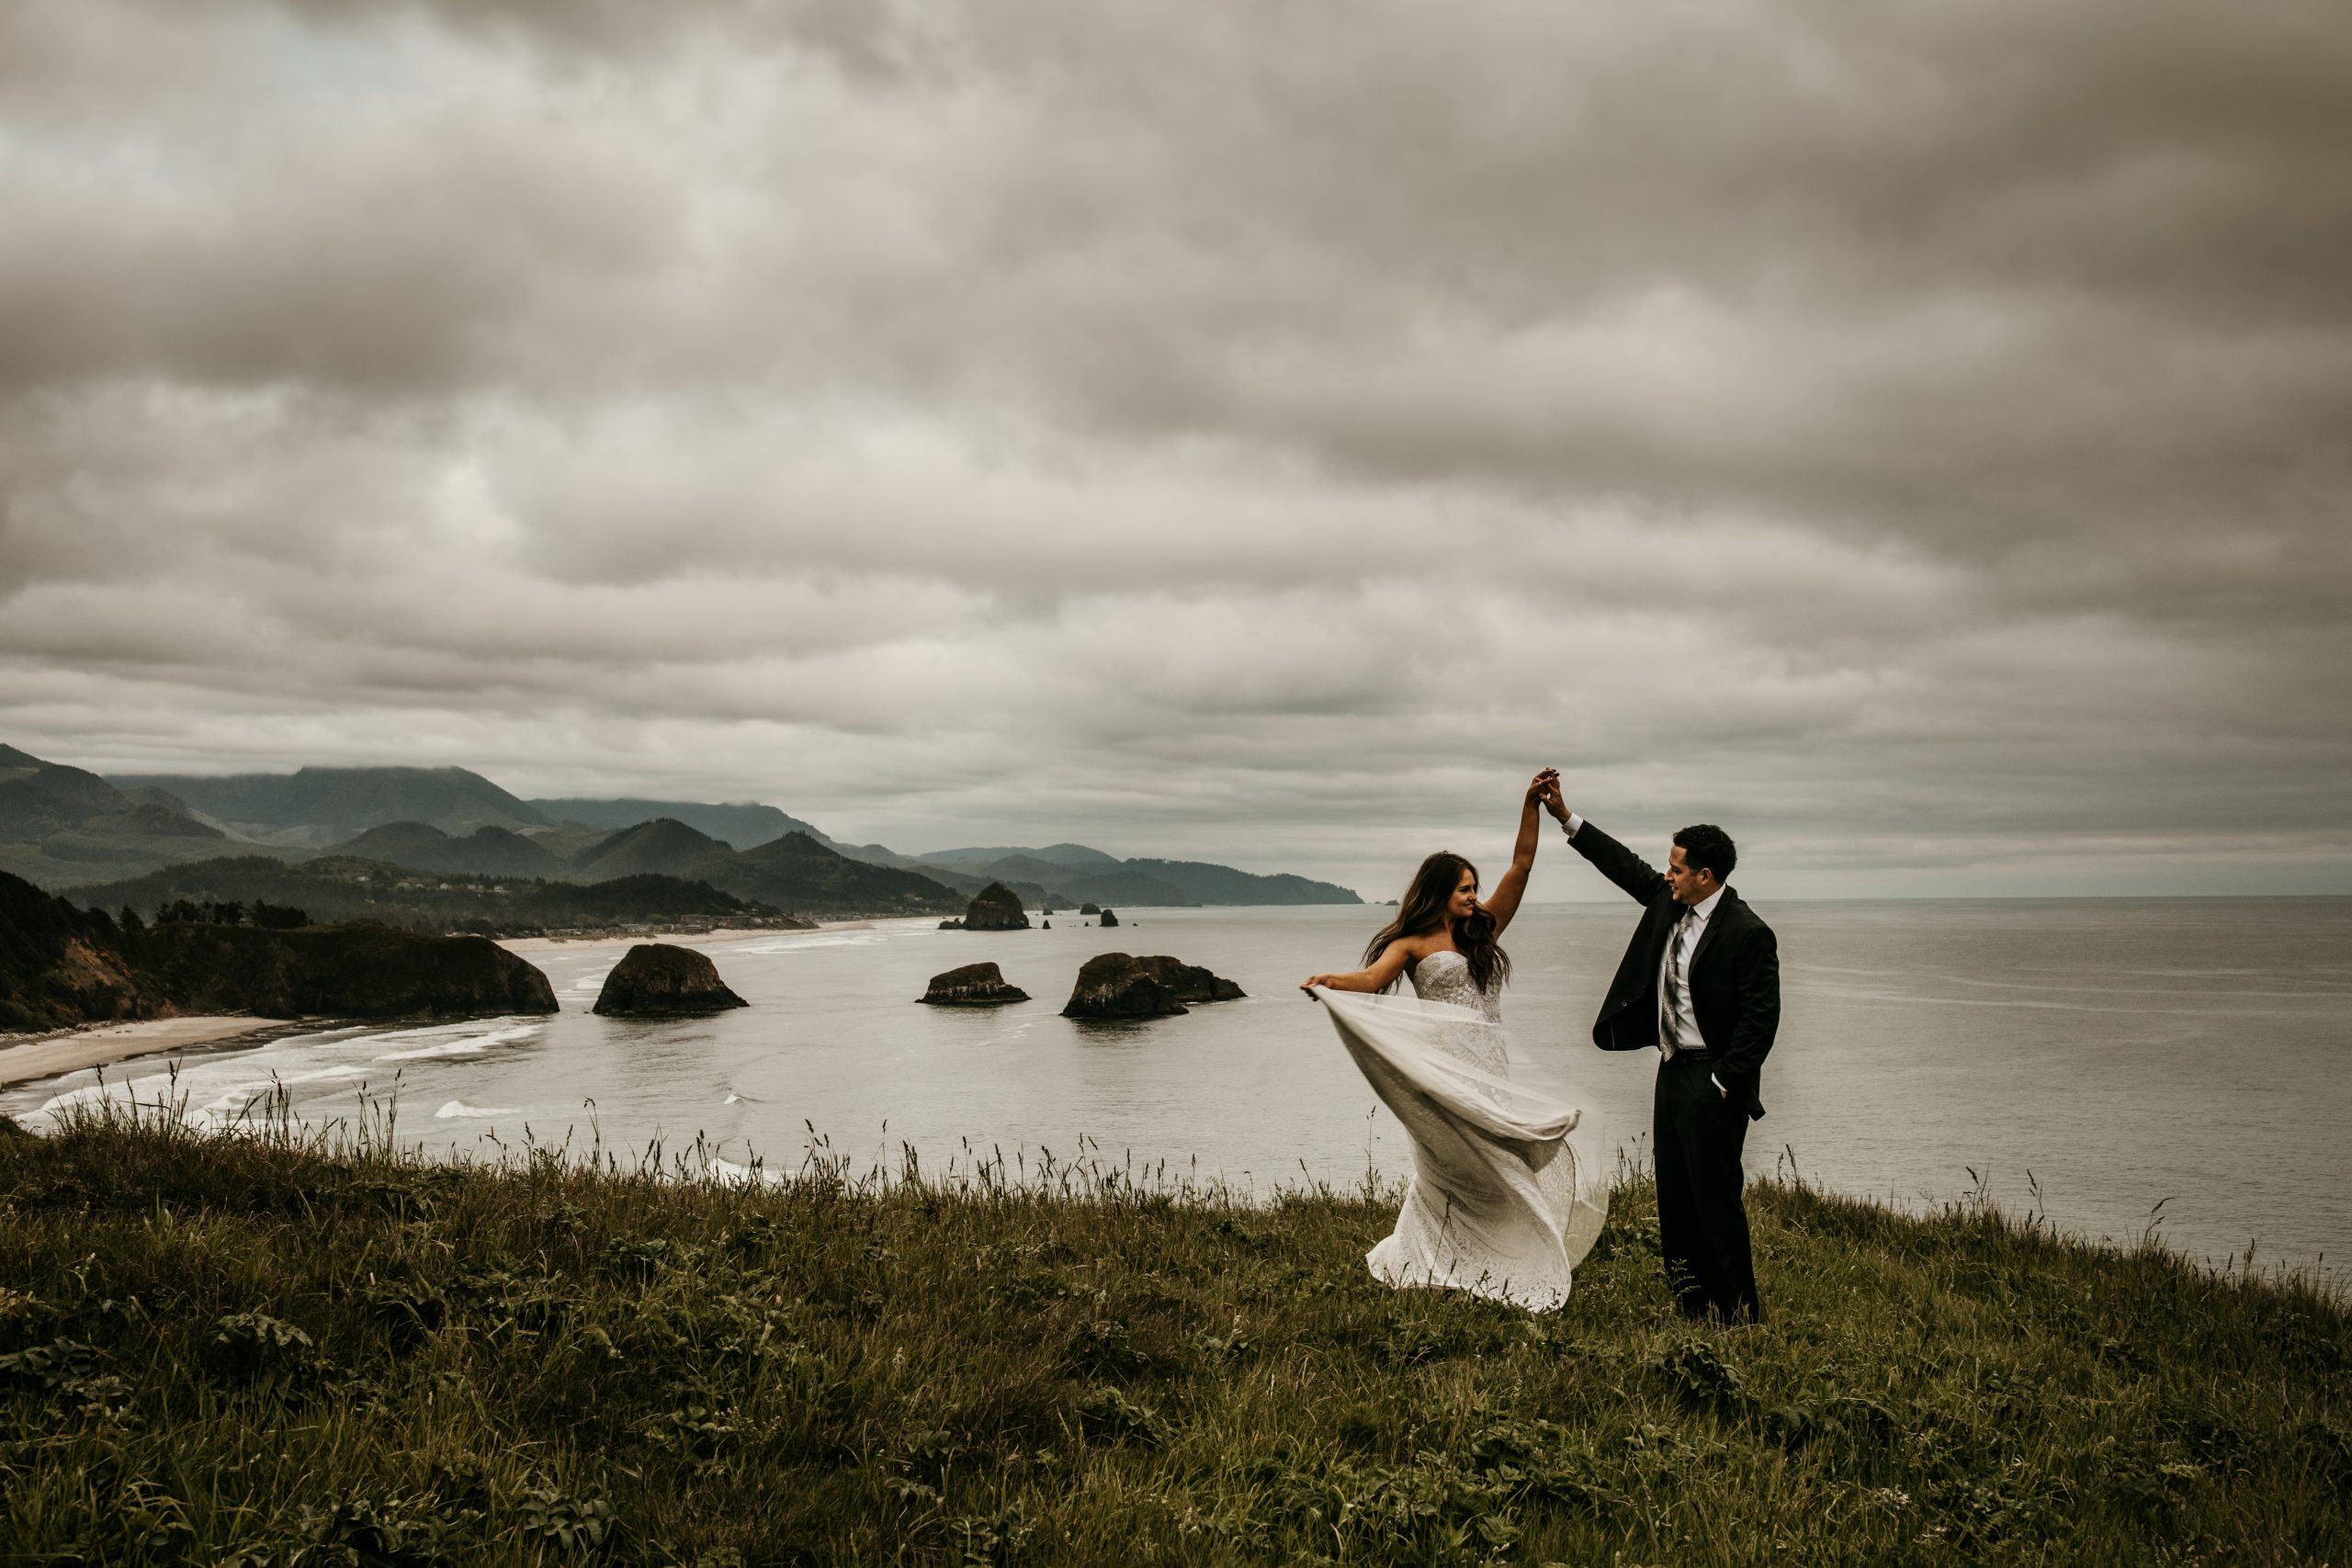 A bride and groom celebrating by dancingm, overlooking the cliffs on the Pacific Ocean, or Pacific Northwest.